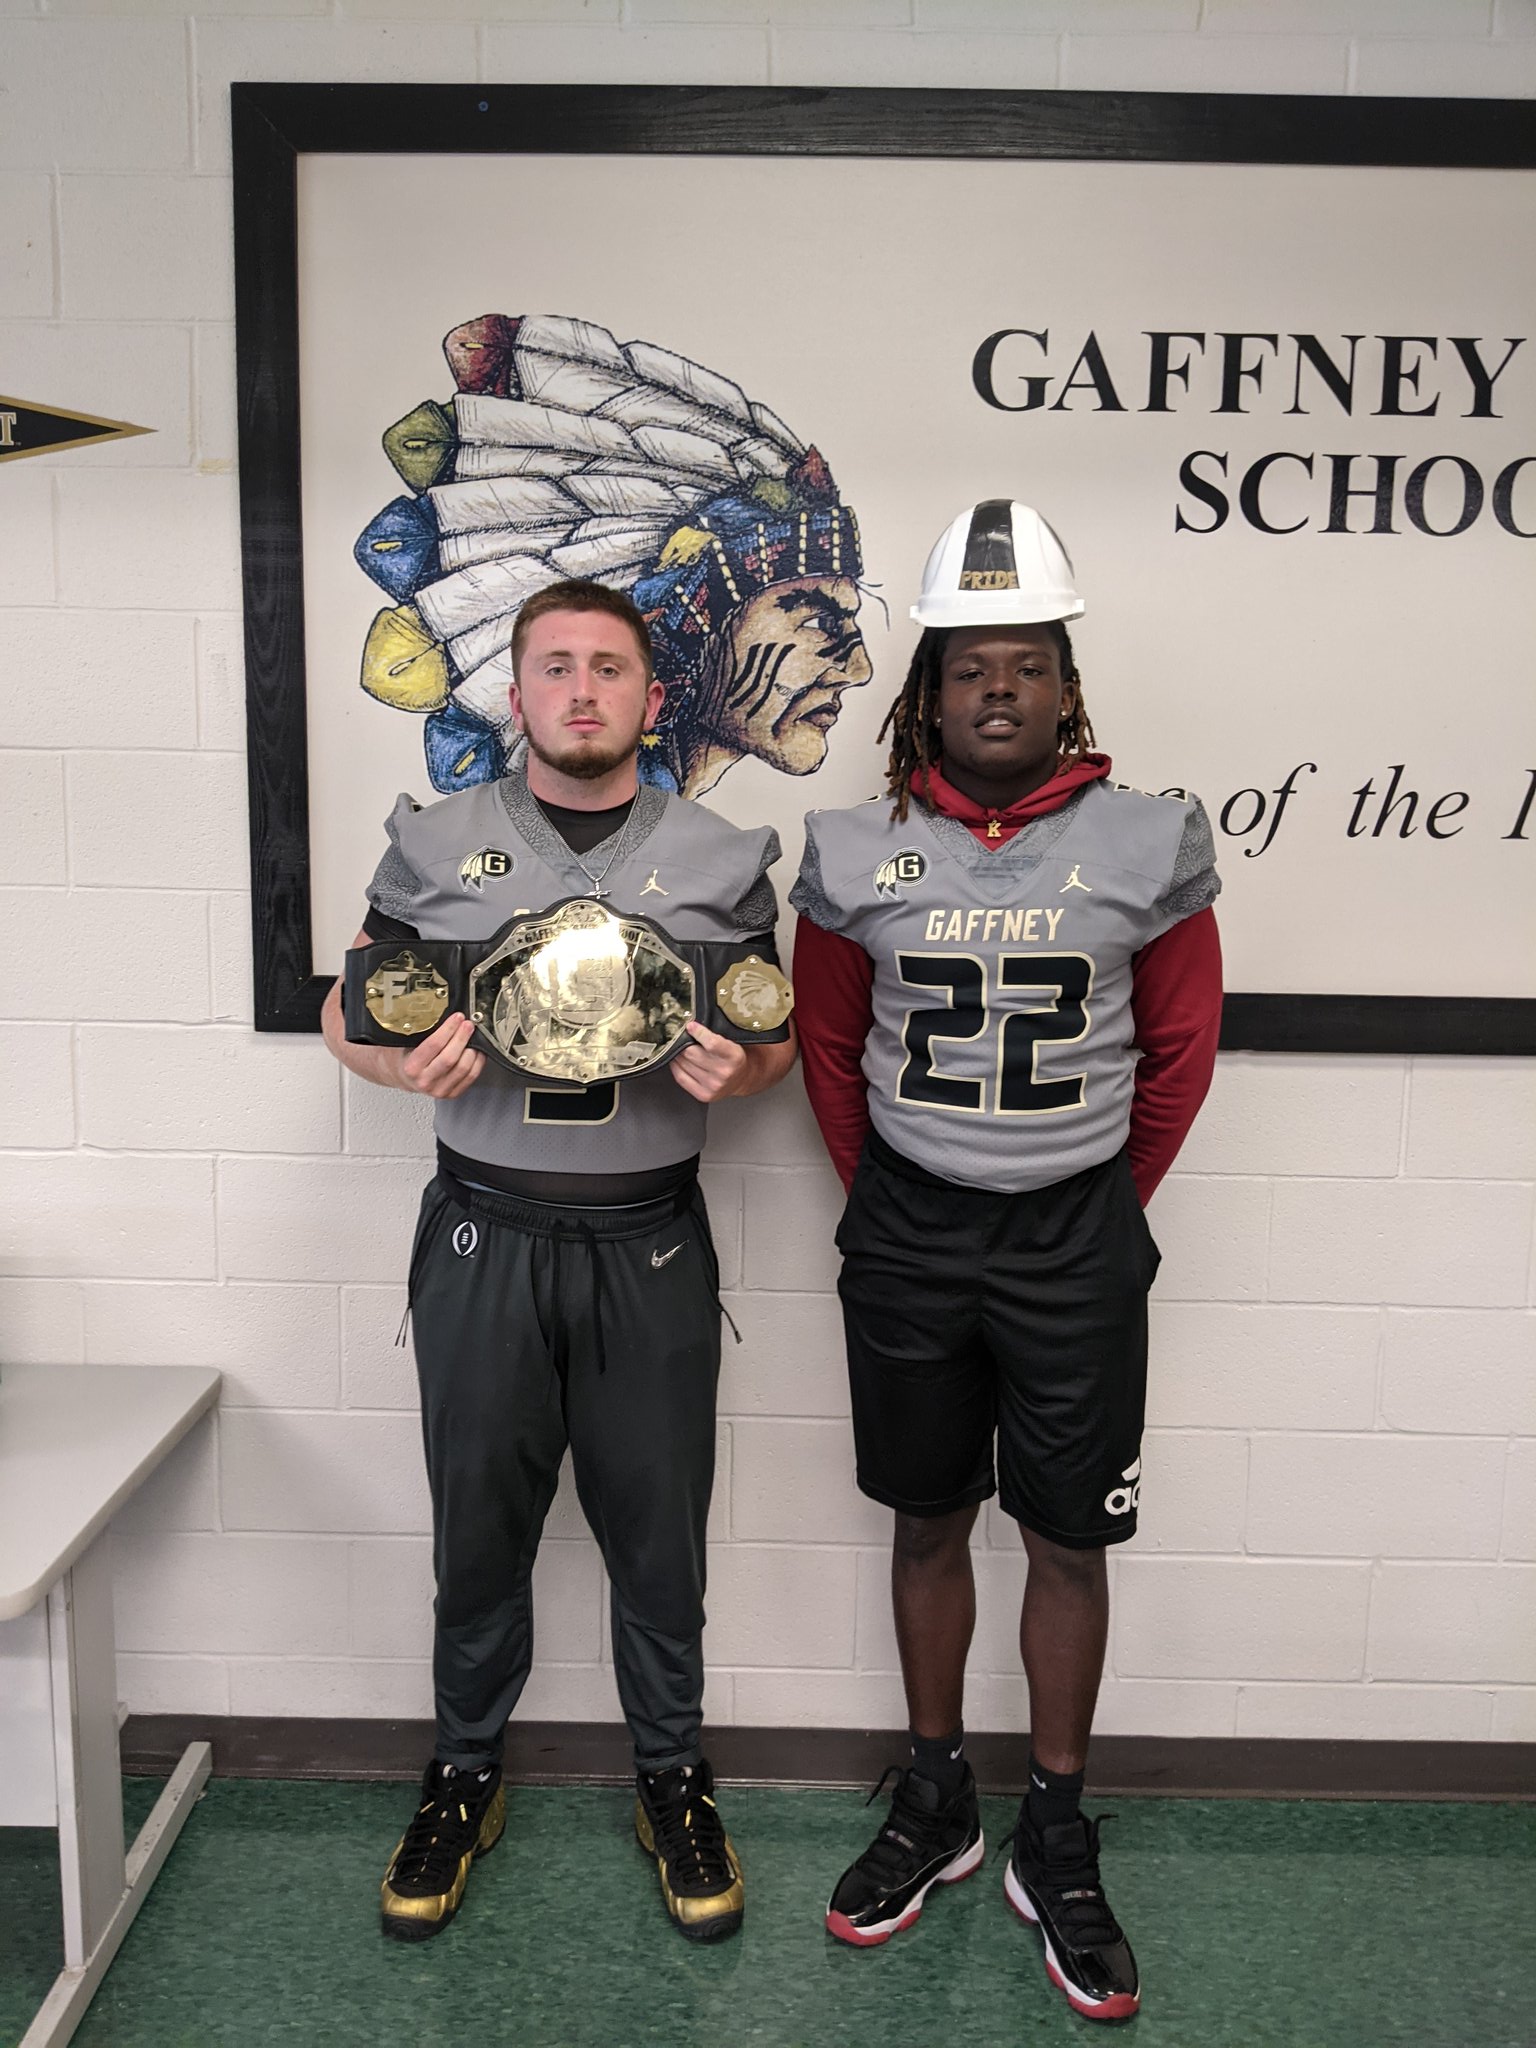 Gaffney Football on Twitter "Congrats to _LB_5 on receiving Player of